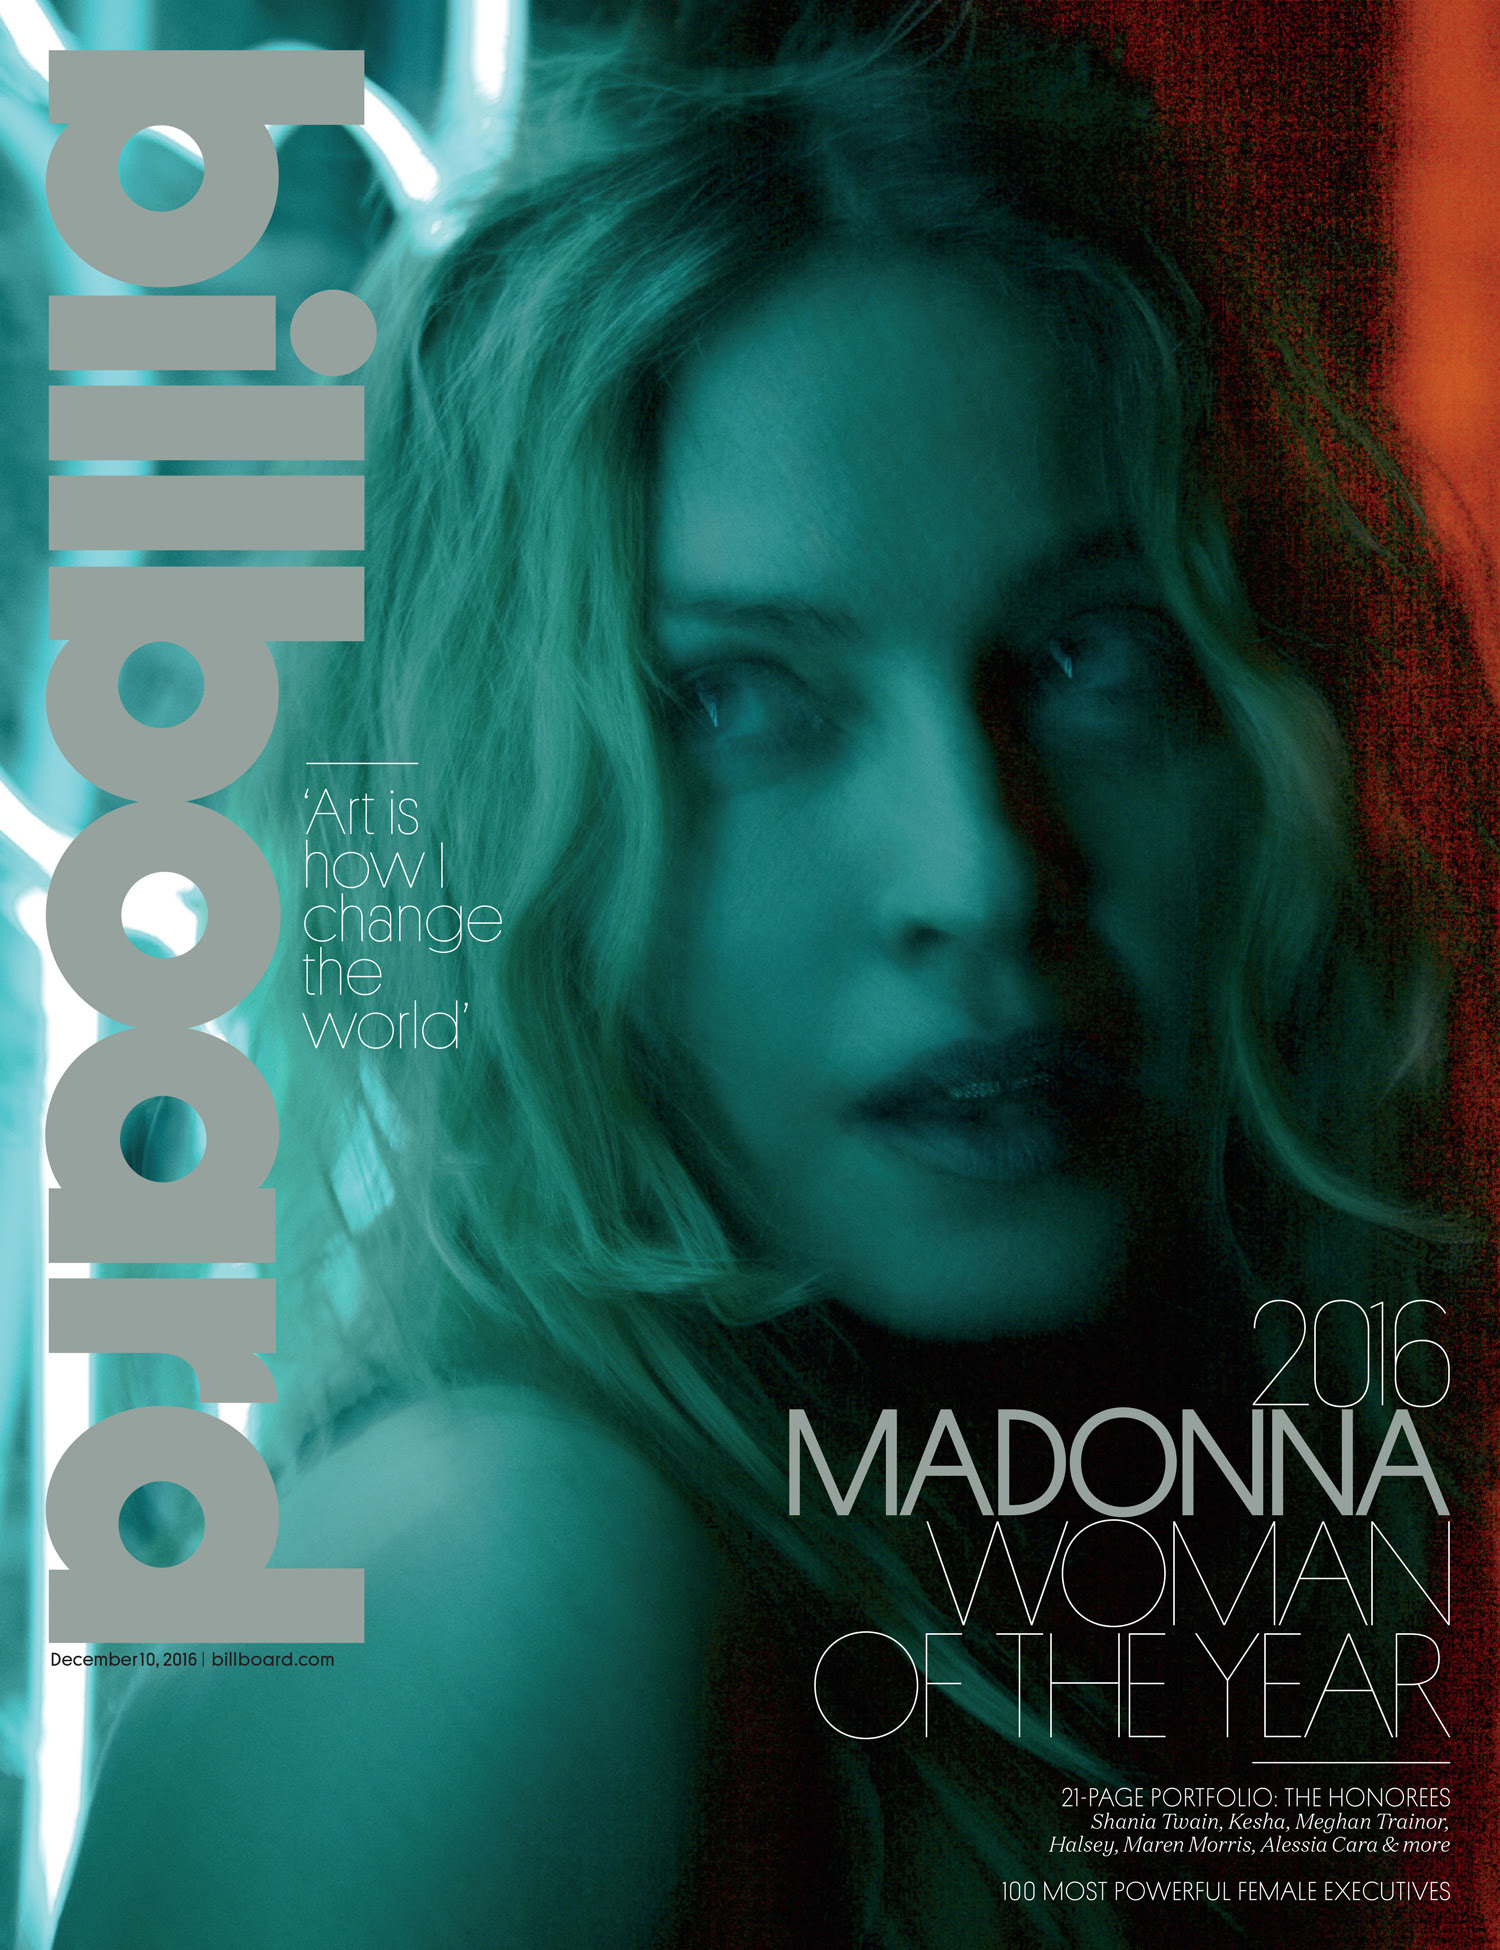 Madonna on the cover of Billboard